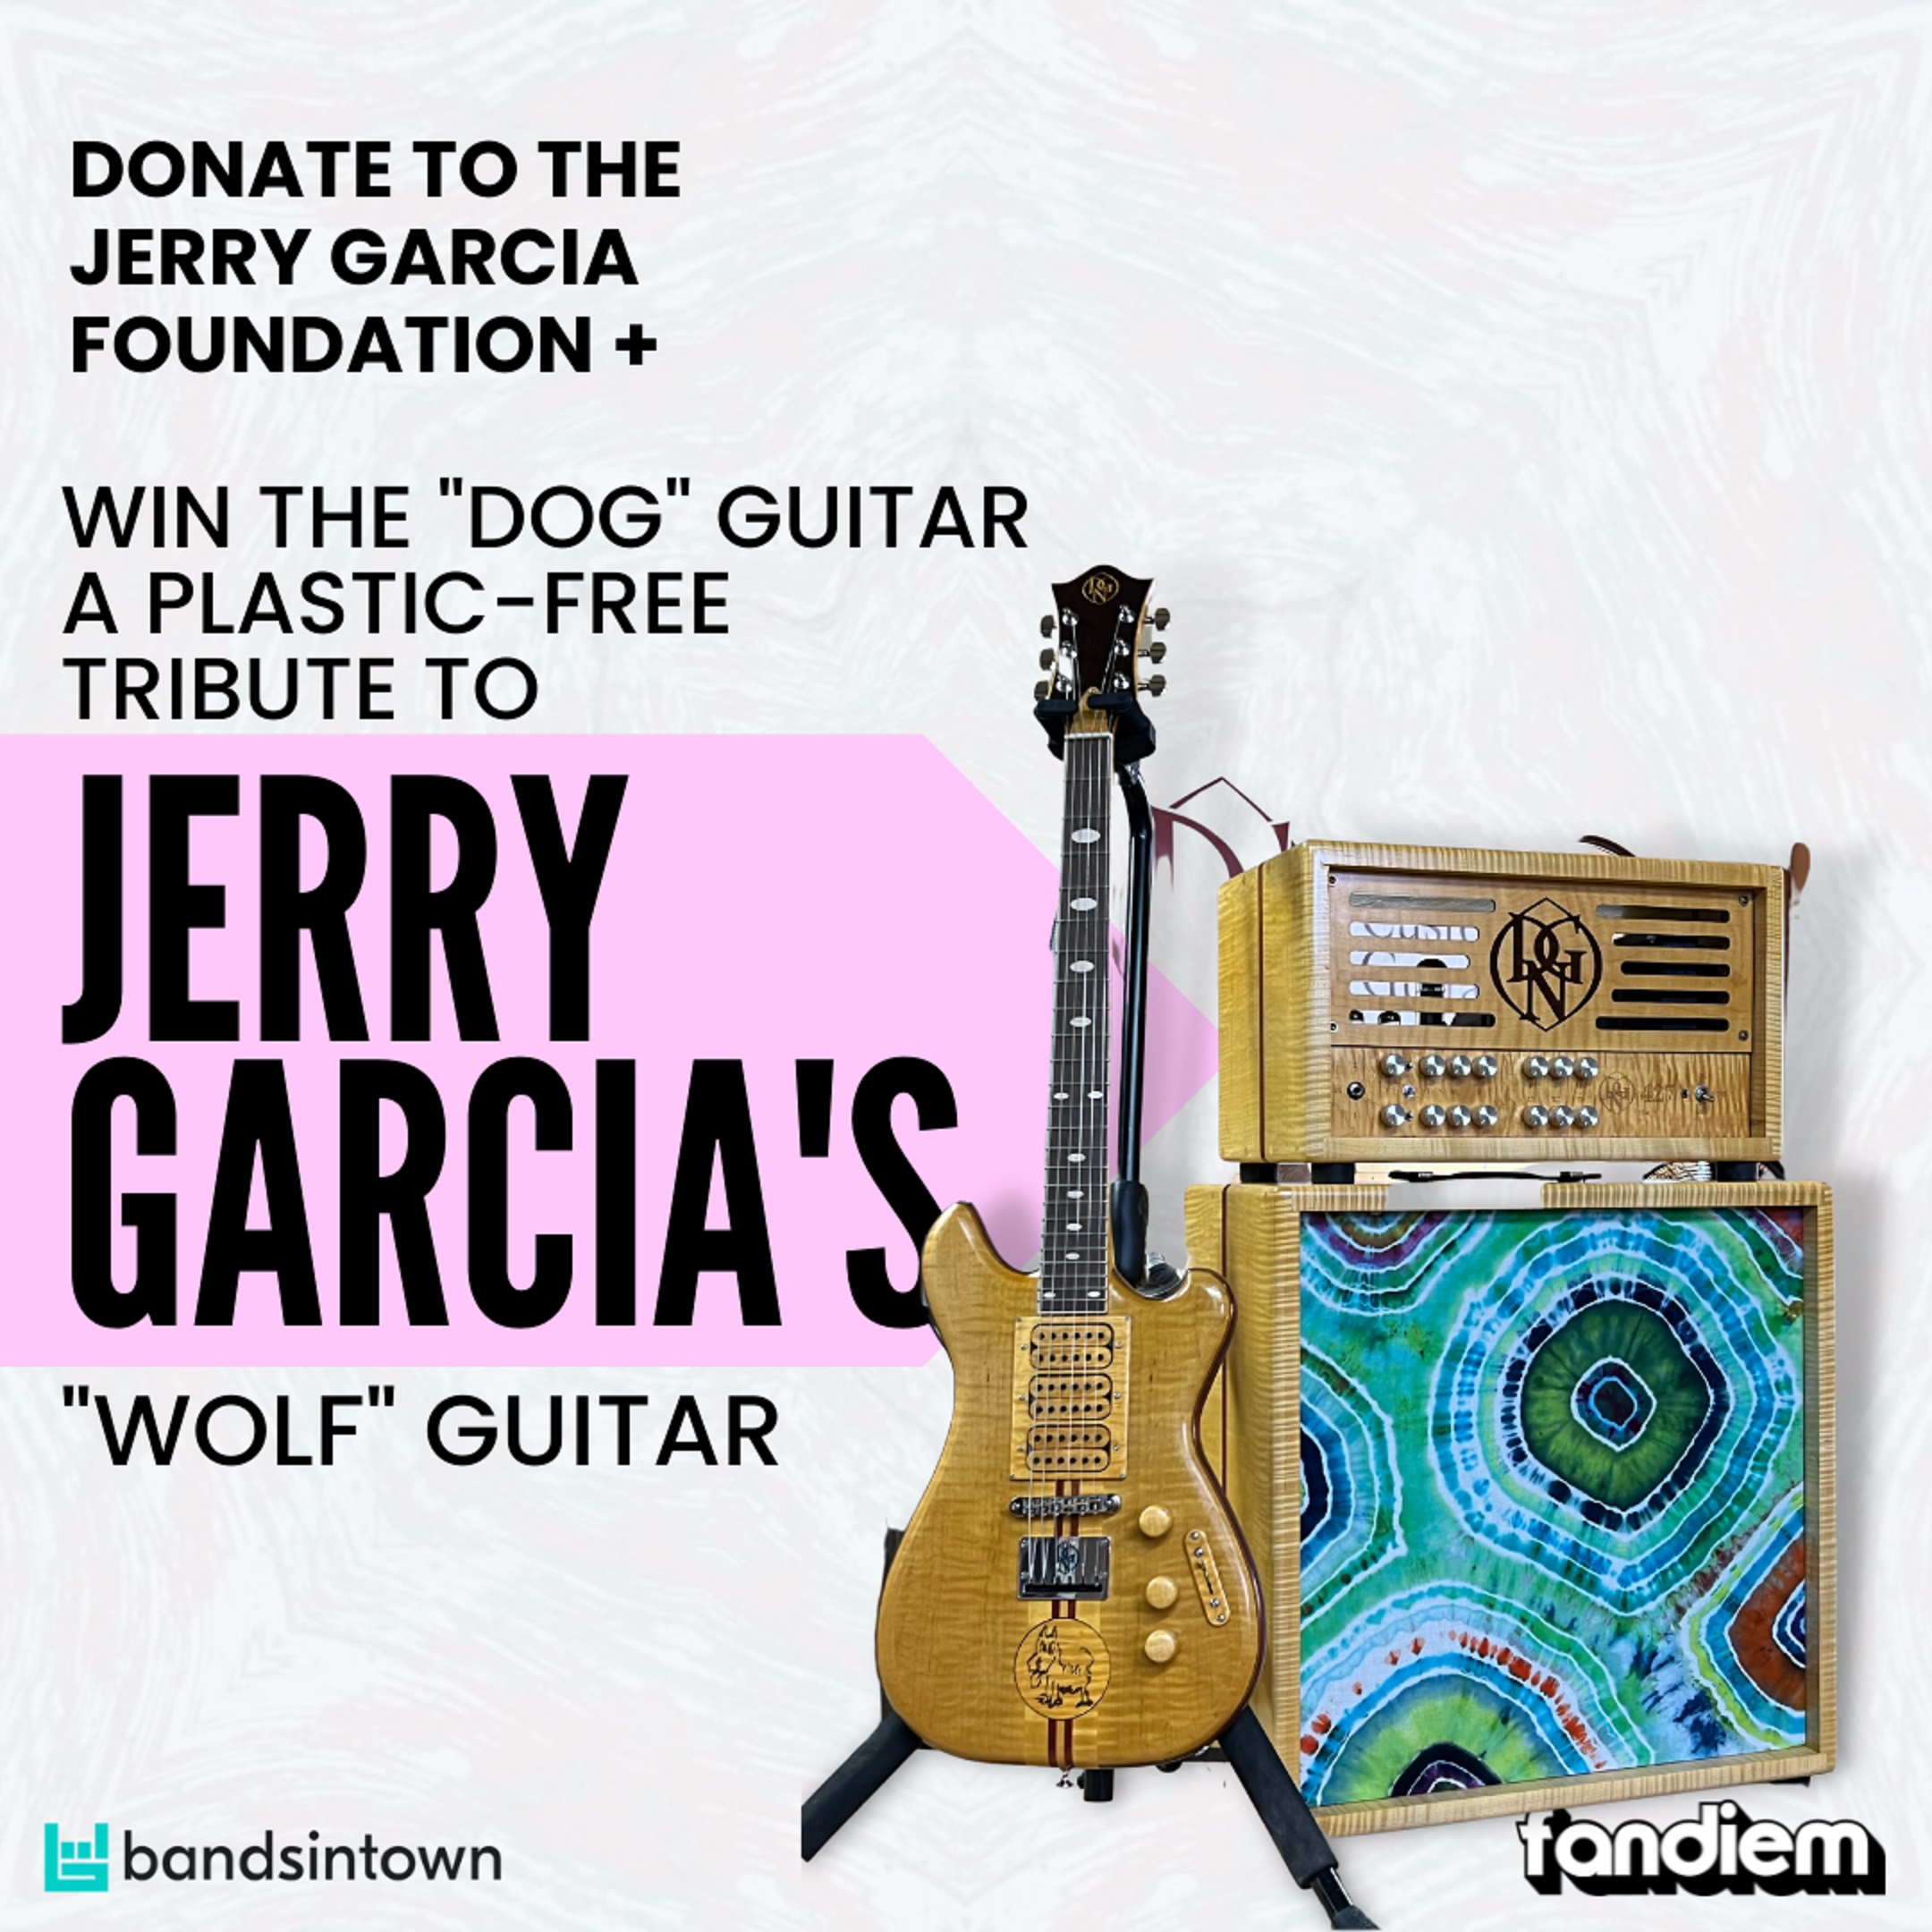 Fundraiser Sweepstakes to Celebrate Jerry Garcia's 80th Birthday Gives Away 1-of-1 Recreation of Jerry's "Wolf" Guitar